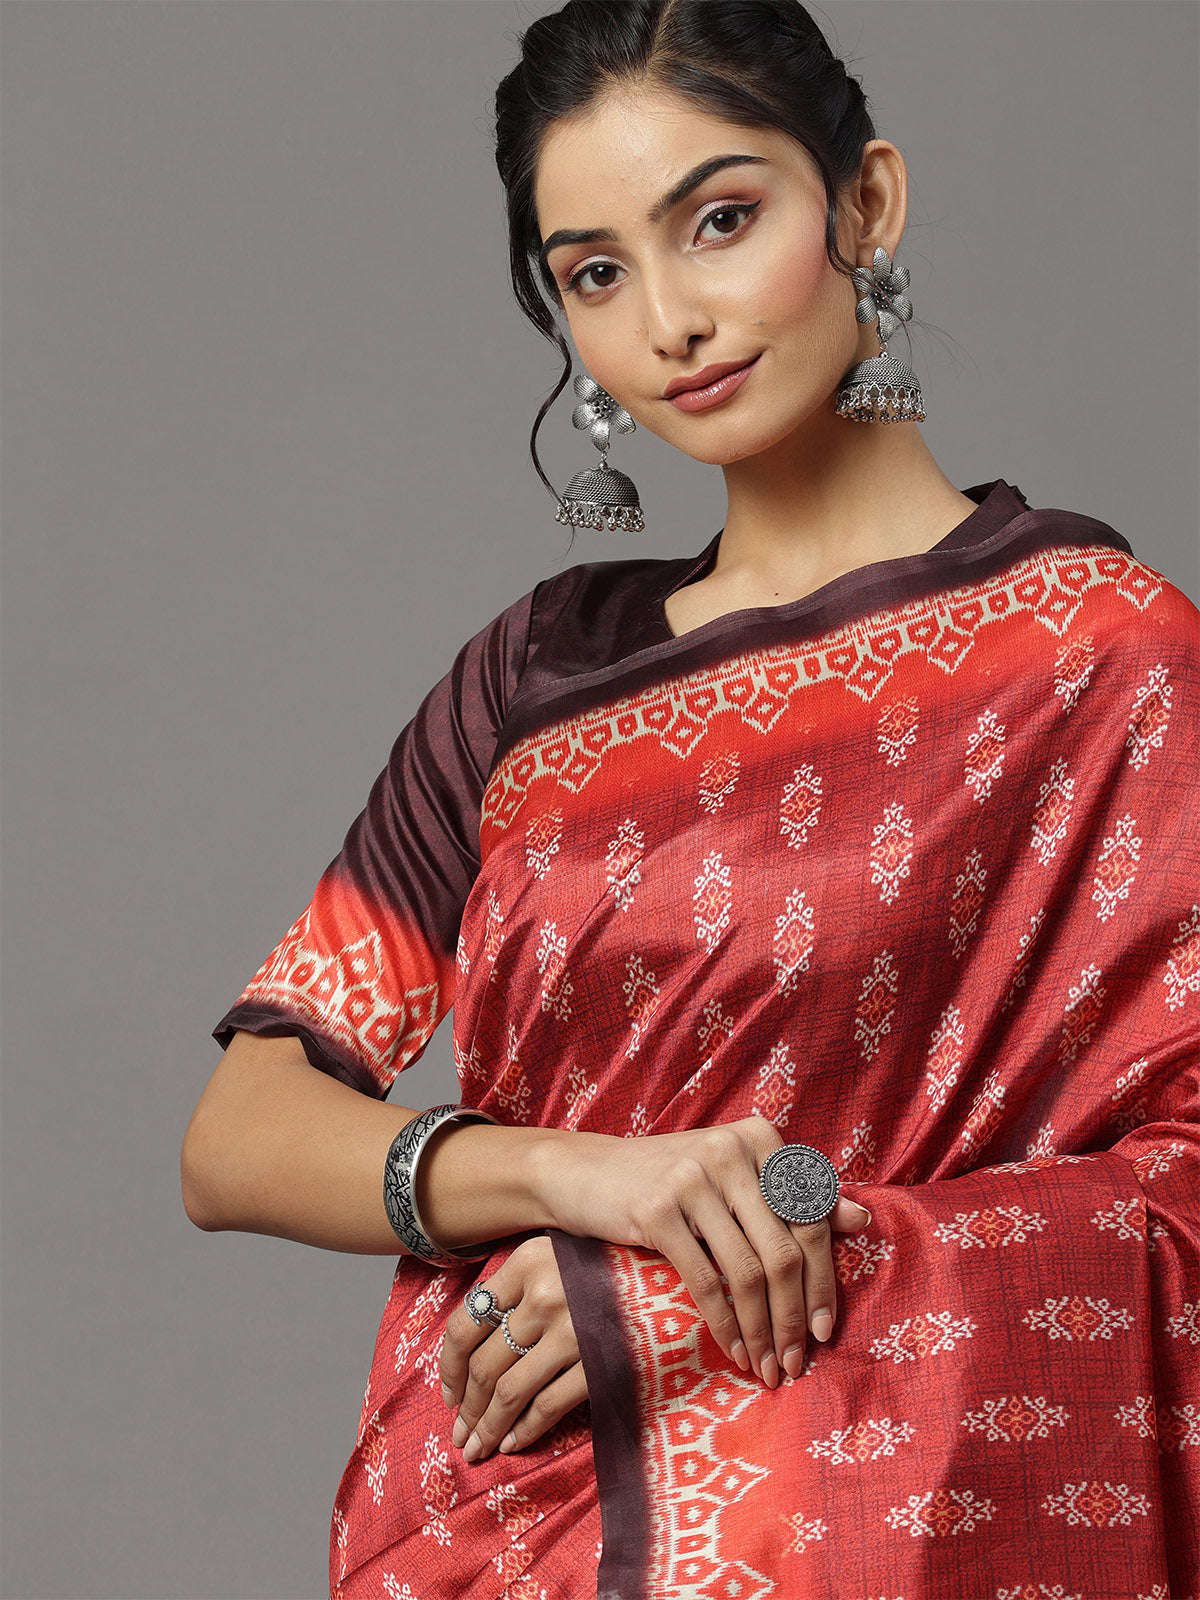 Maroon Printed Blend Silk Saree With Unstitched Blouse